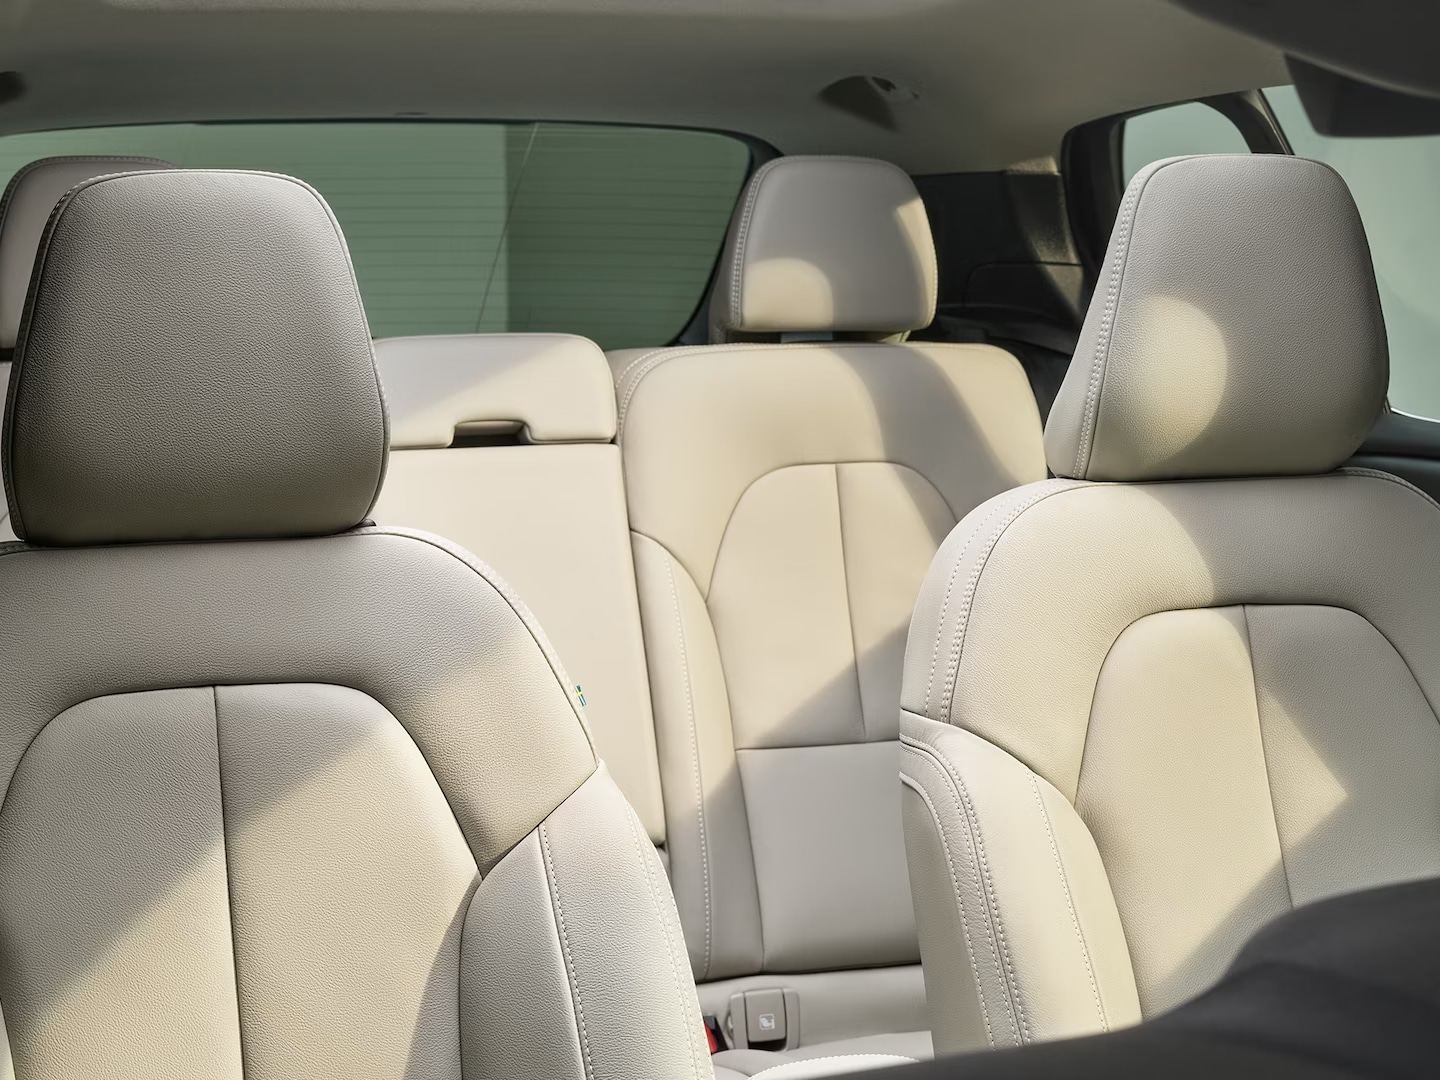 The Volvo XC40 mild hybrid’s available leather seat design.